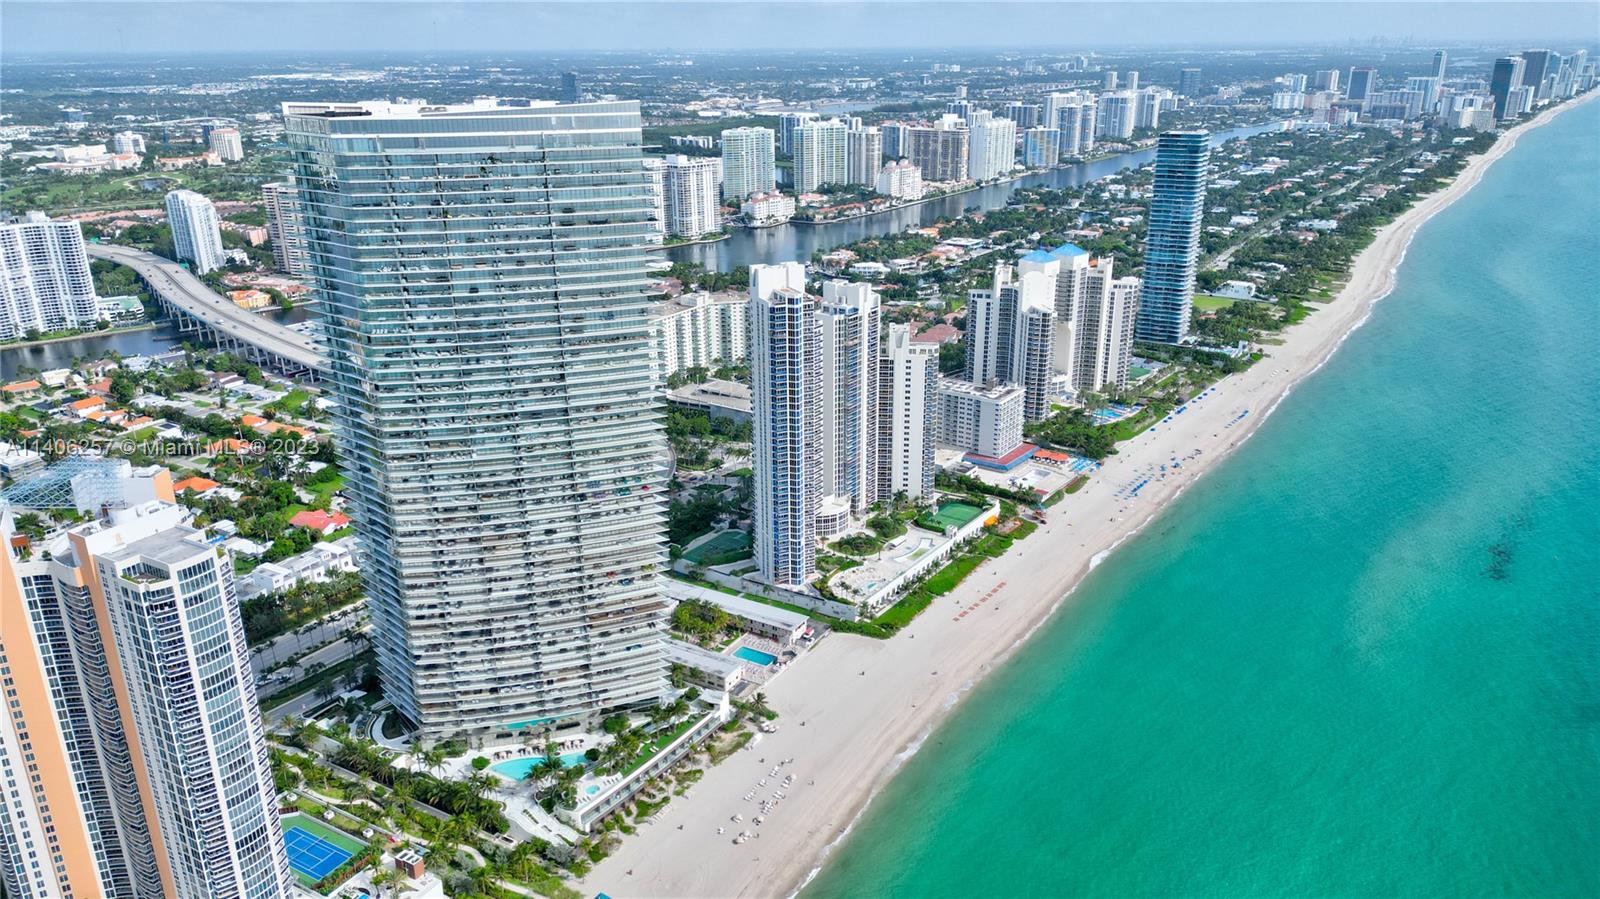 Property for Sale at Address Not Disclosed, Sunny Isles Beach, Miami-Dade County, Florida - Bedrooms: 4 
Bathrooms: 6  - $7,900,000